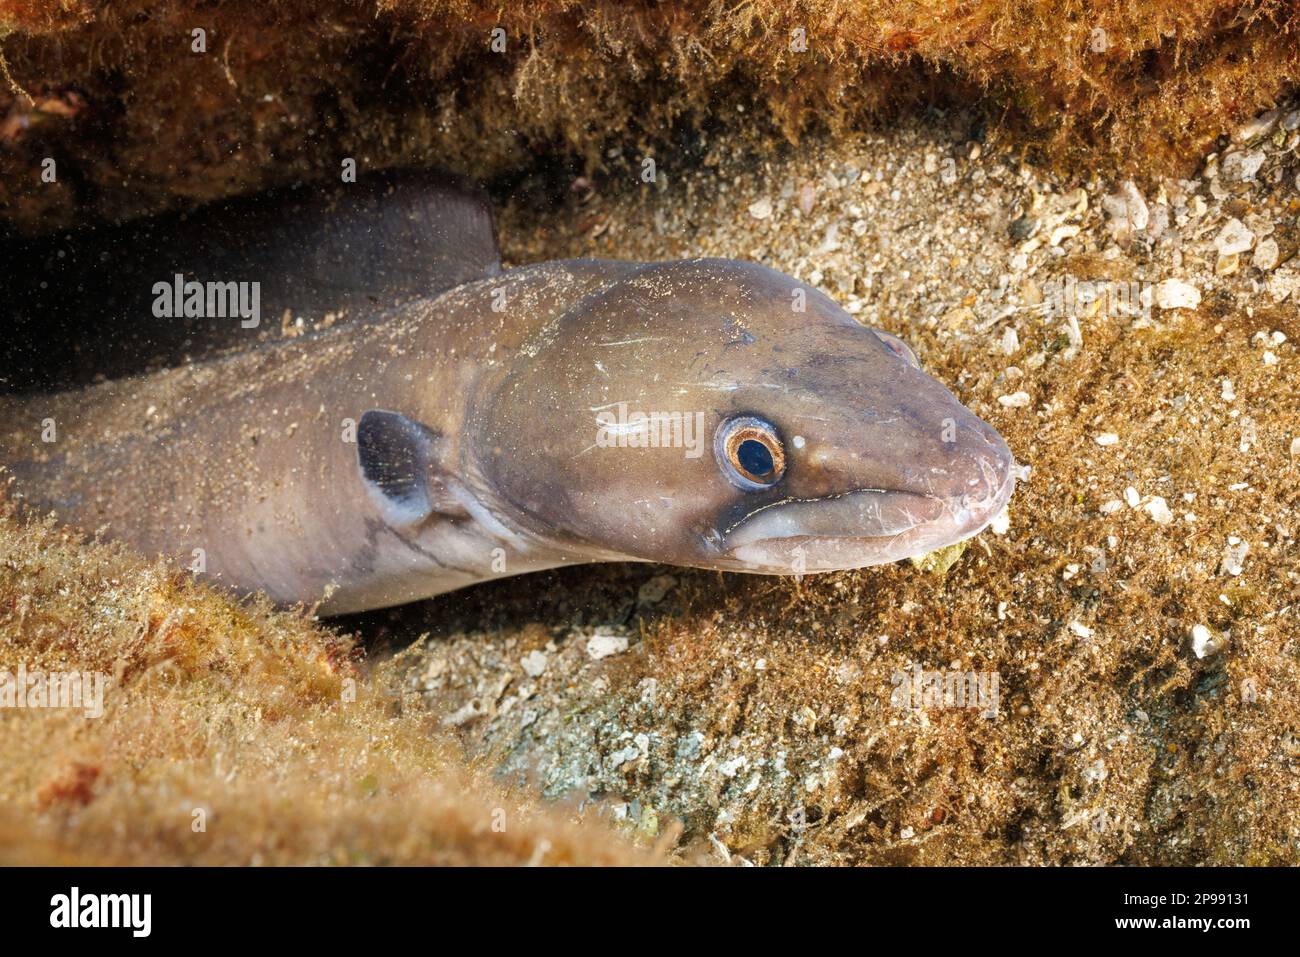 The Hawaiian conger eels, Conger marginatus, are endemic to Hawaii. The wide bands running the length of the eel are only found at night when this ima Stock Photo